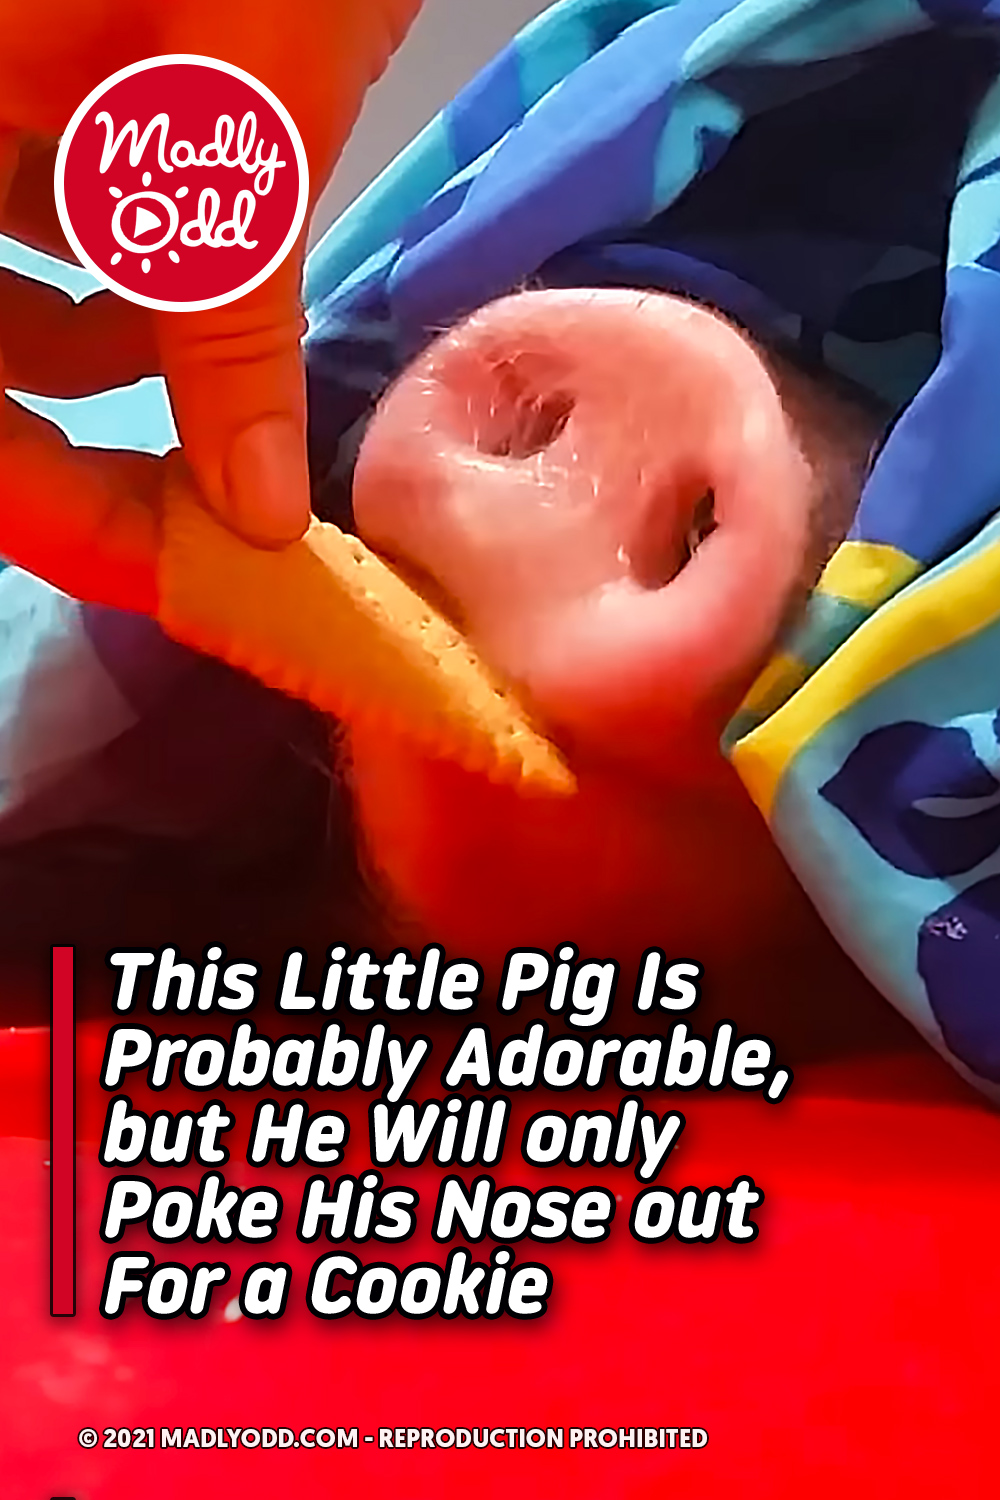 This Little Pig Is Probably Adorable, but He Will only Poke His Nose out For a Cookie